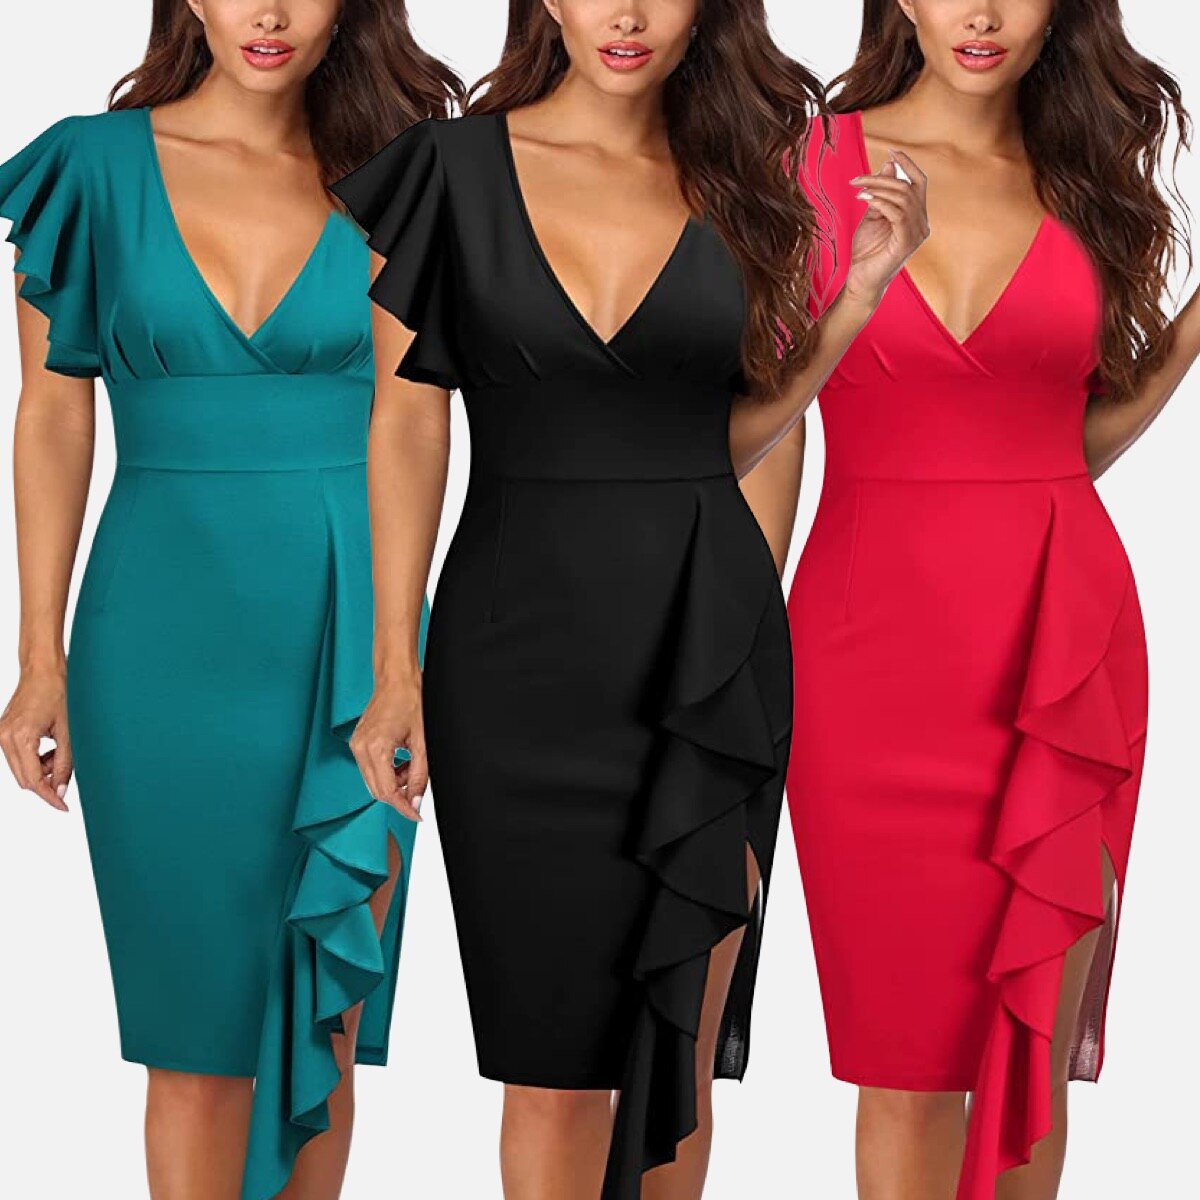 This $42 Deep V-Neck Cocktail Dress Has ...